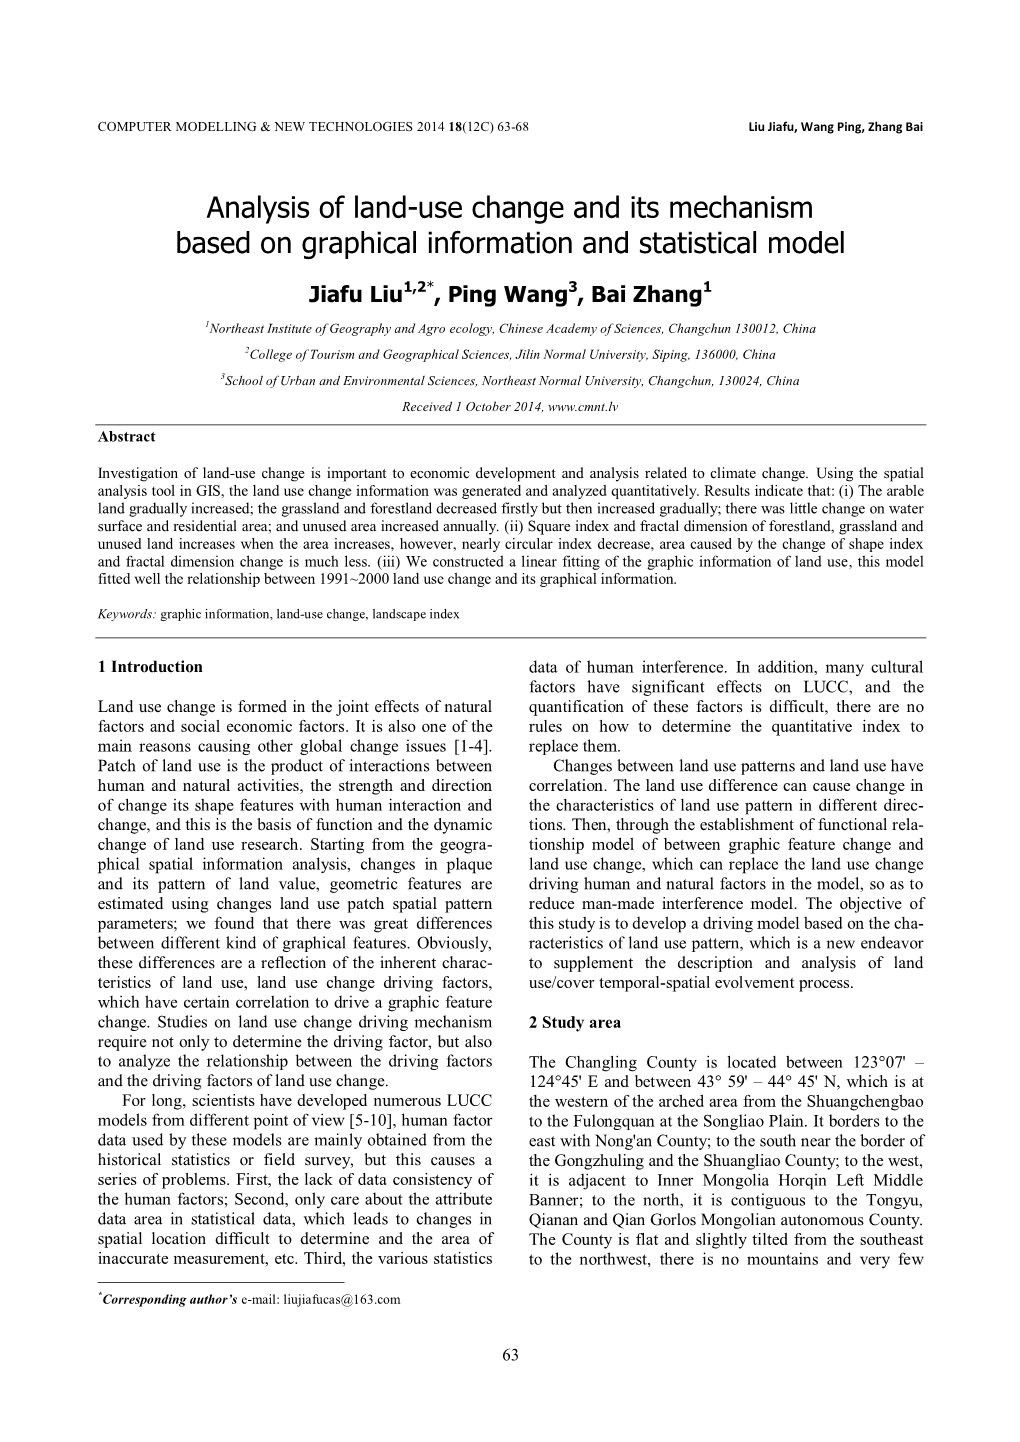 Analysis of Land-Use Change and Its Mechanism Based on Graphical Information and Statistical Model